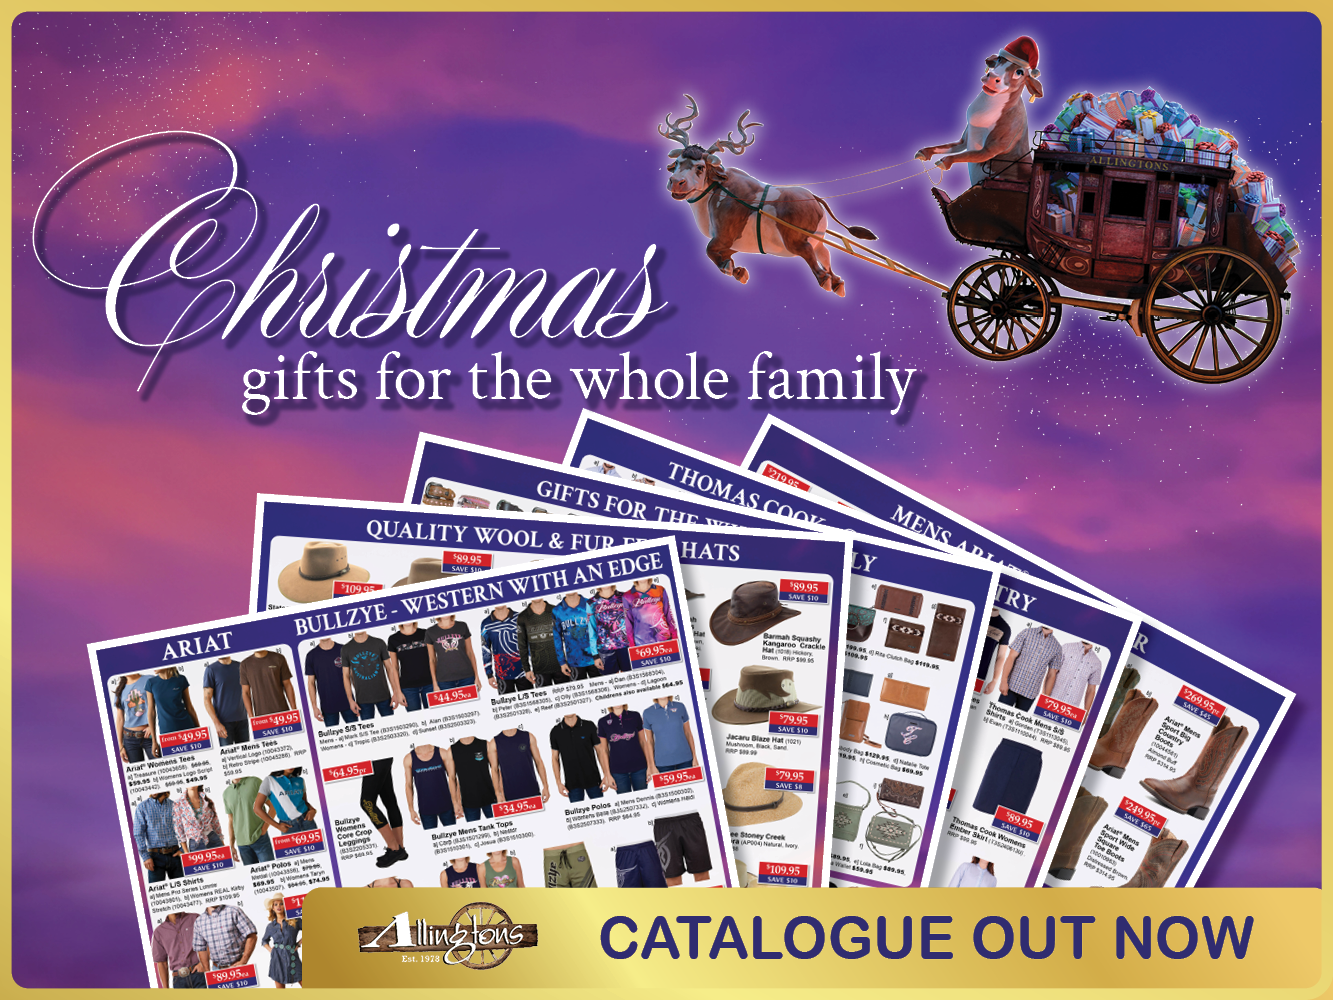 Country Christmas Catalogue out now with link to new catalogue